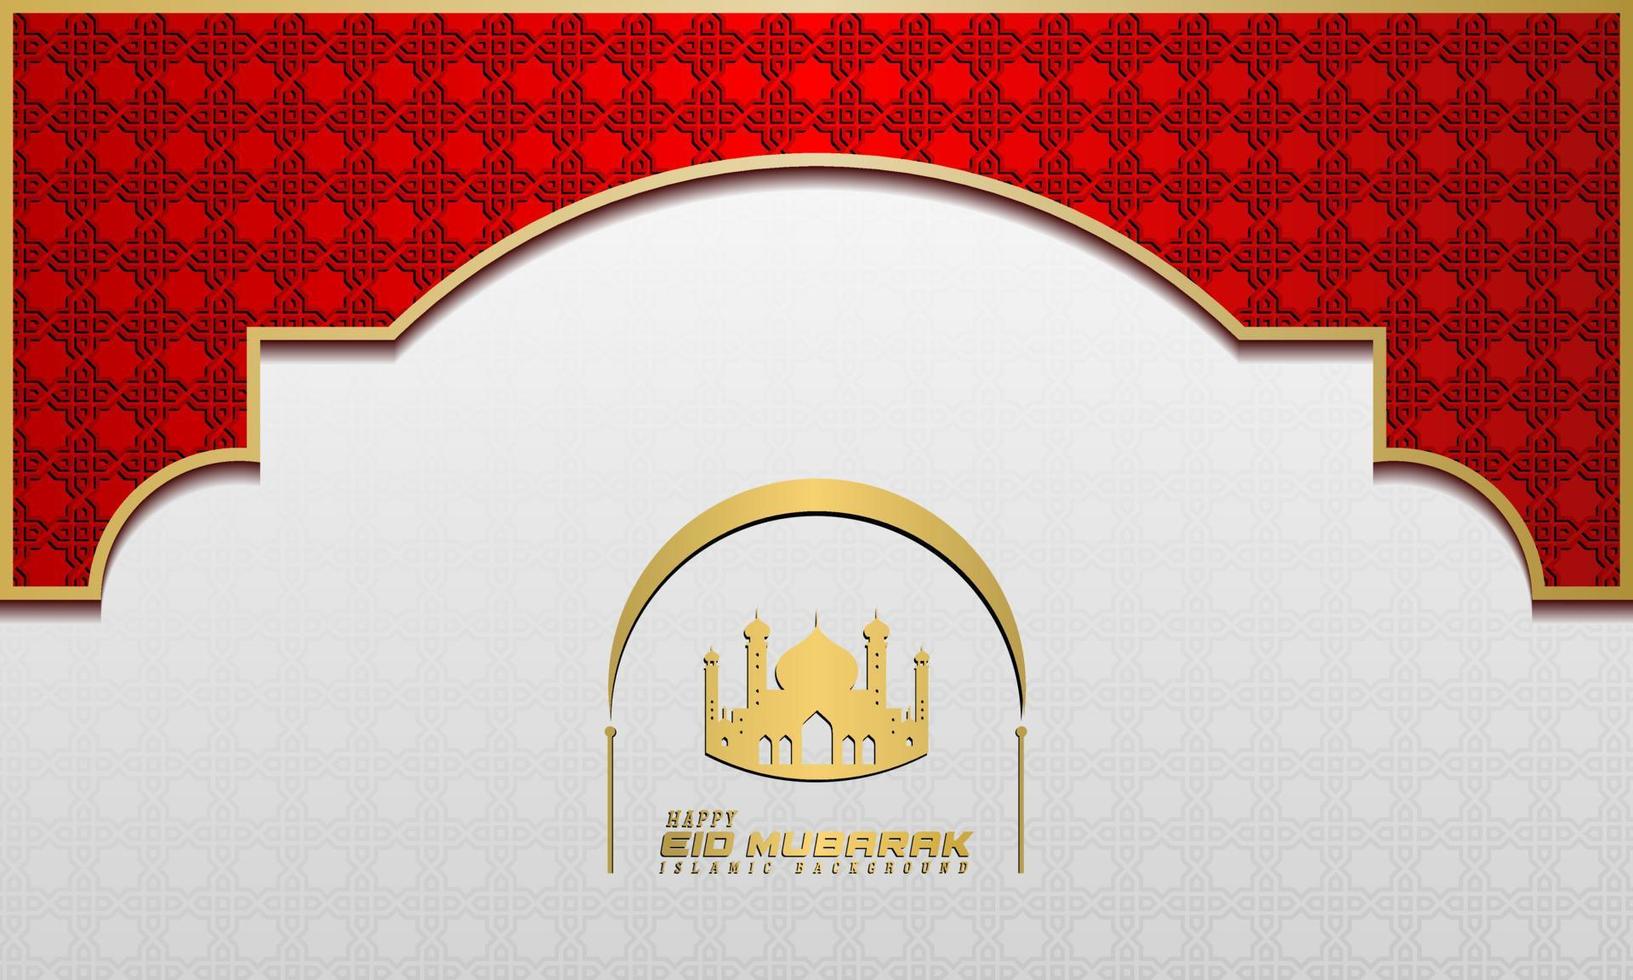 islamic greetings ramadan kareem card design background with classic ornament and mosque vector